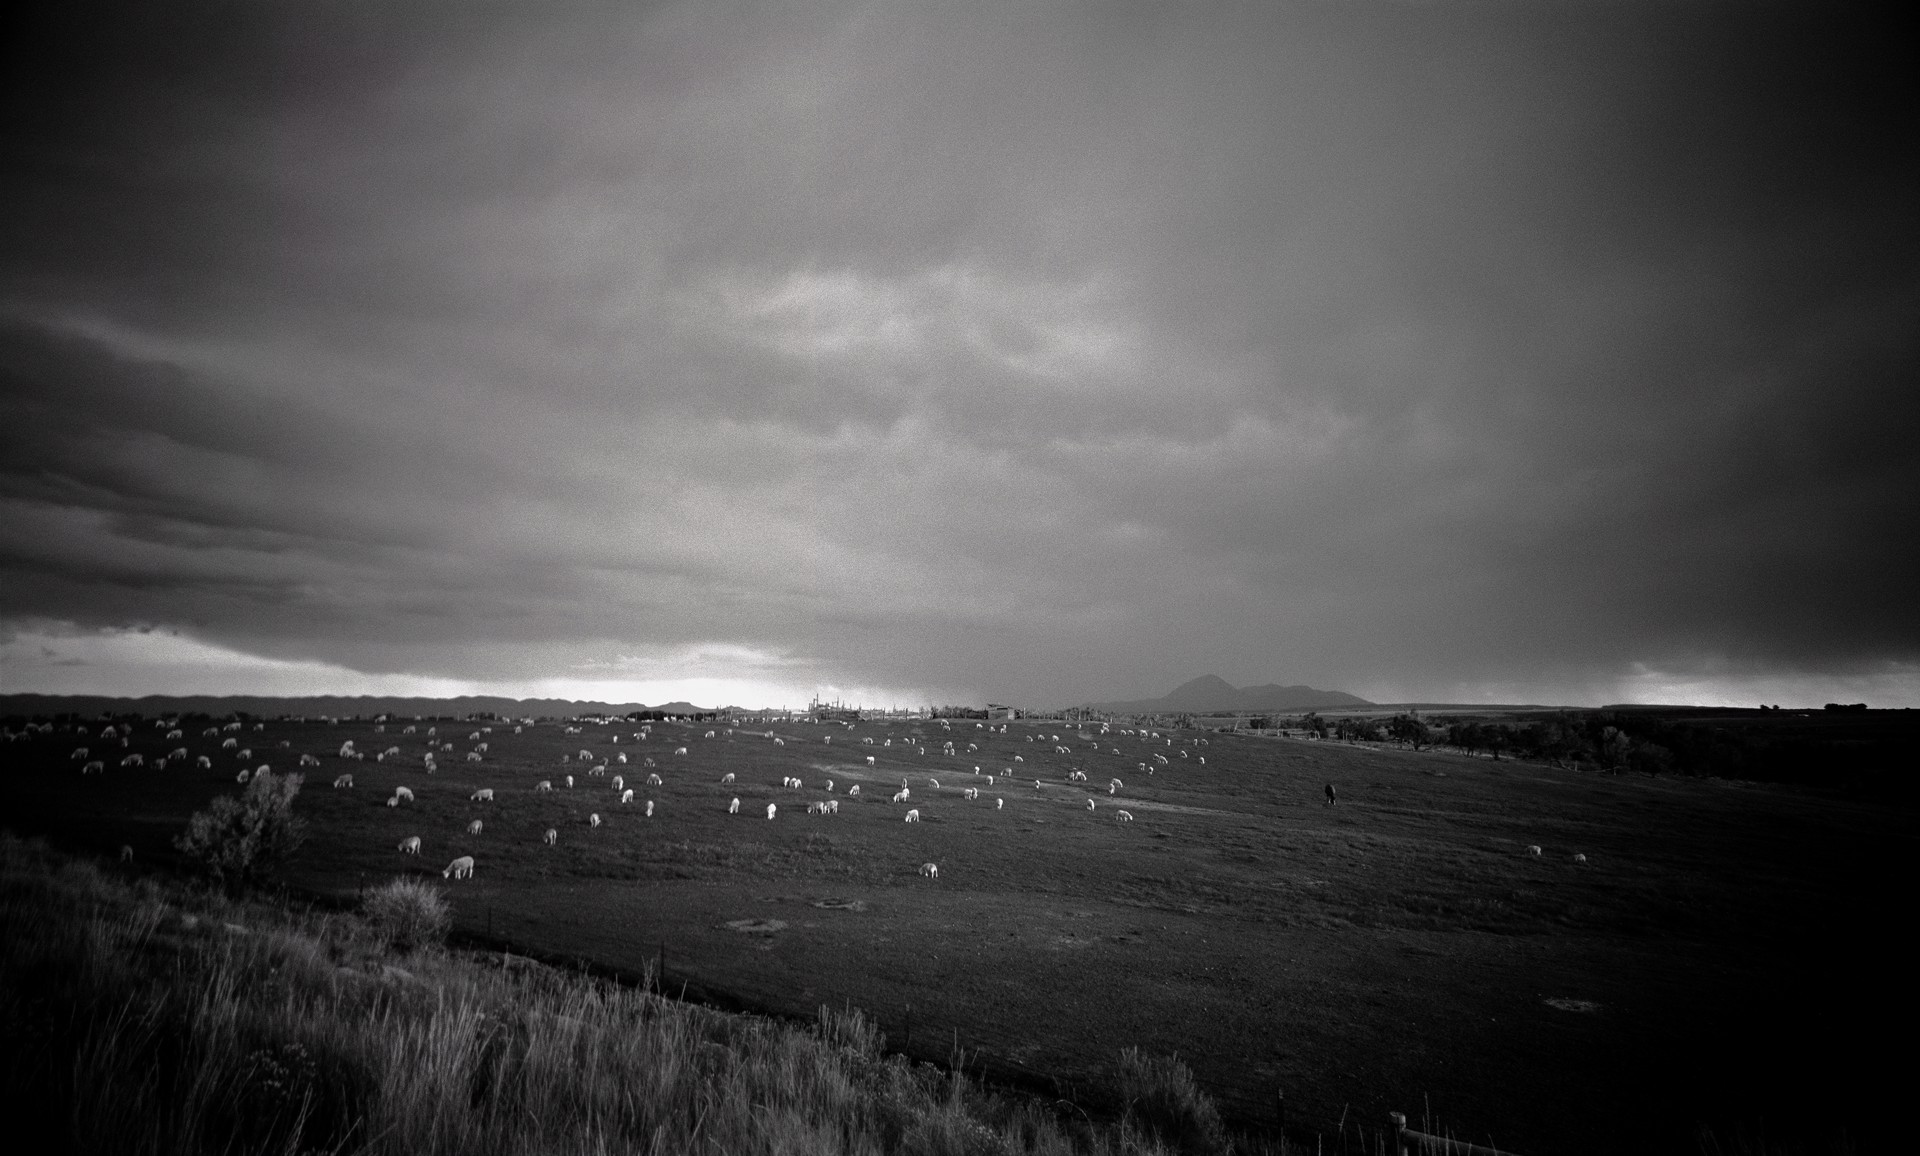 Sheep on Hill, Sleeping Ute Mountain, Near Cortez, Colorado, 1989/2012(Searching by Lawrence McFarland